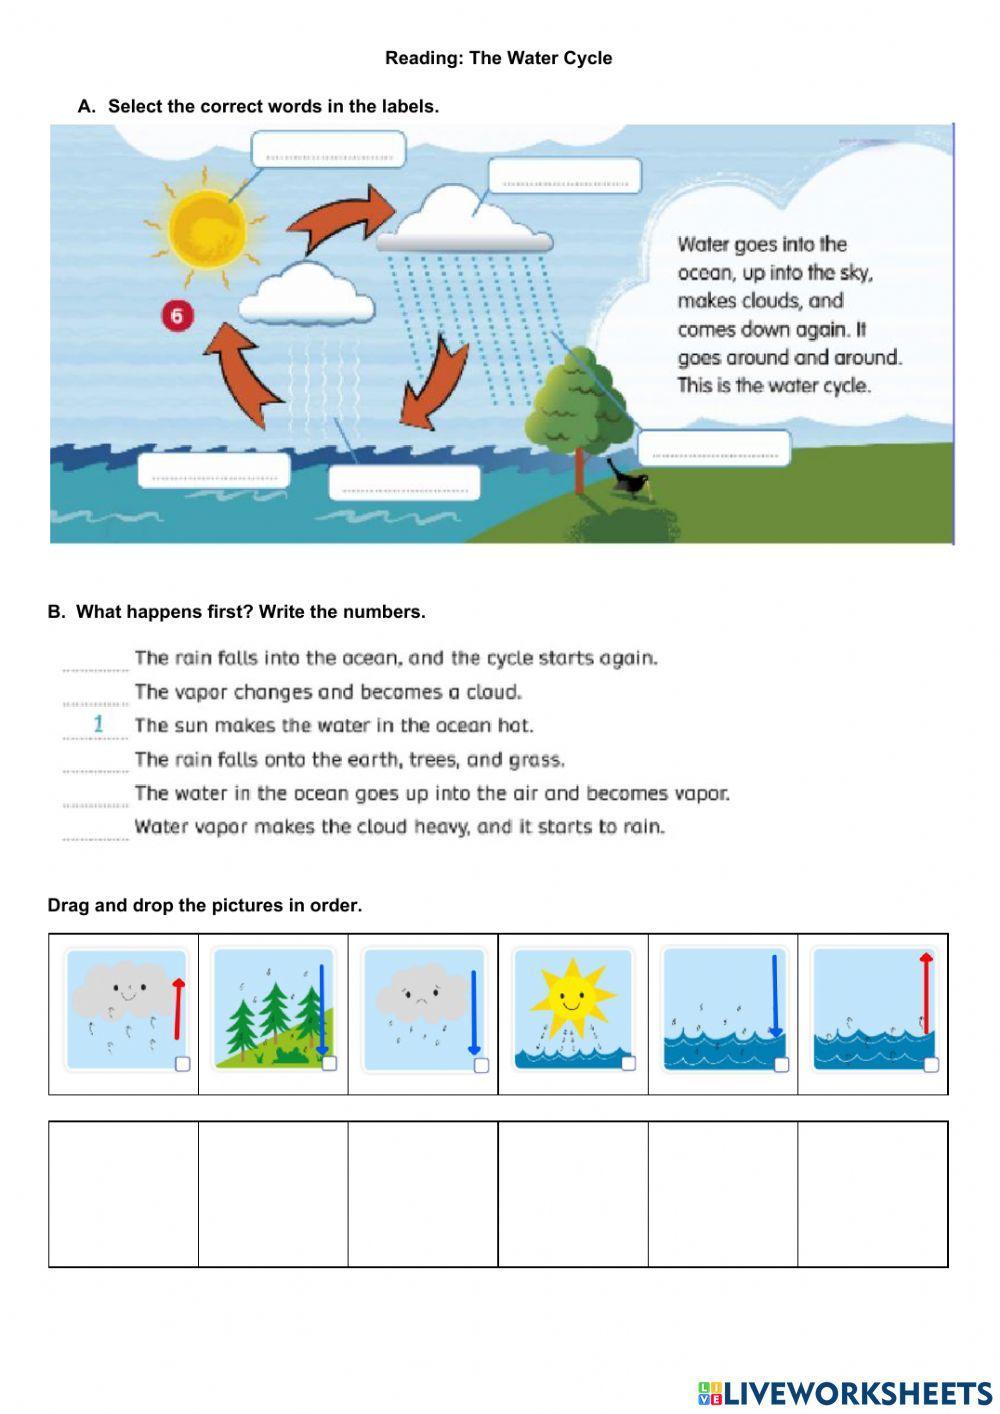 Reading: The Water Cycle